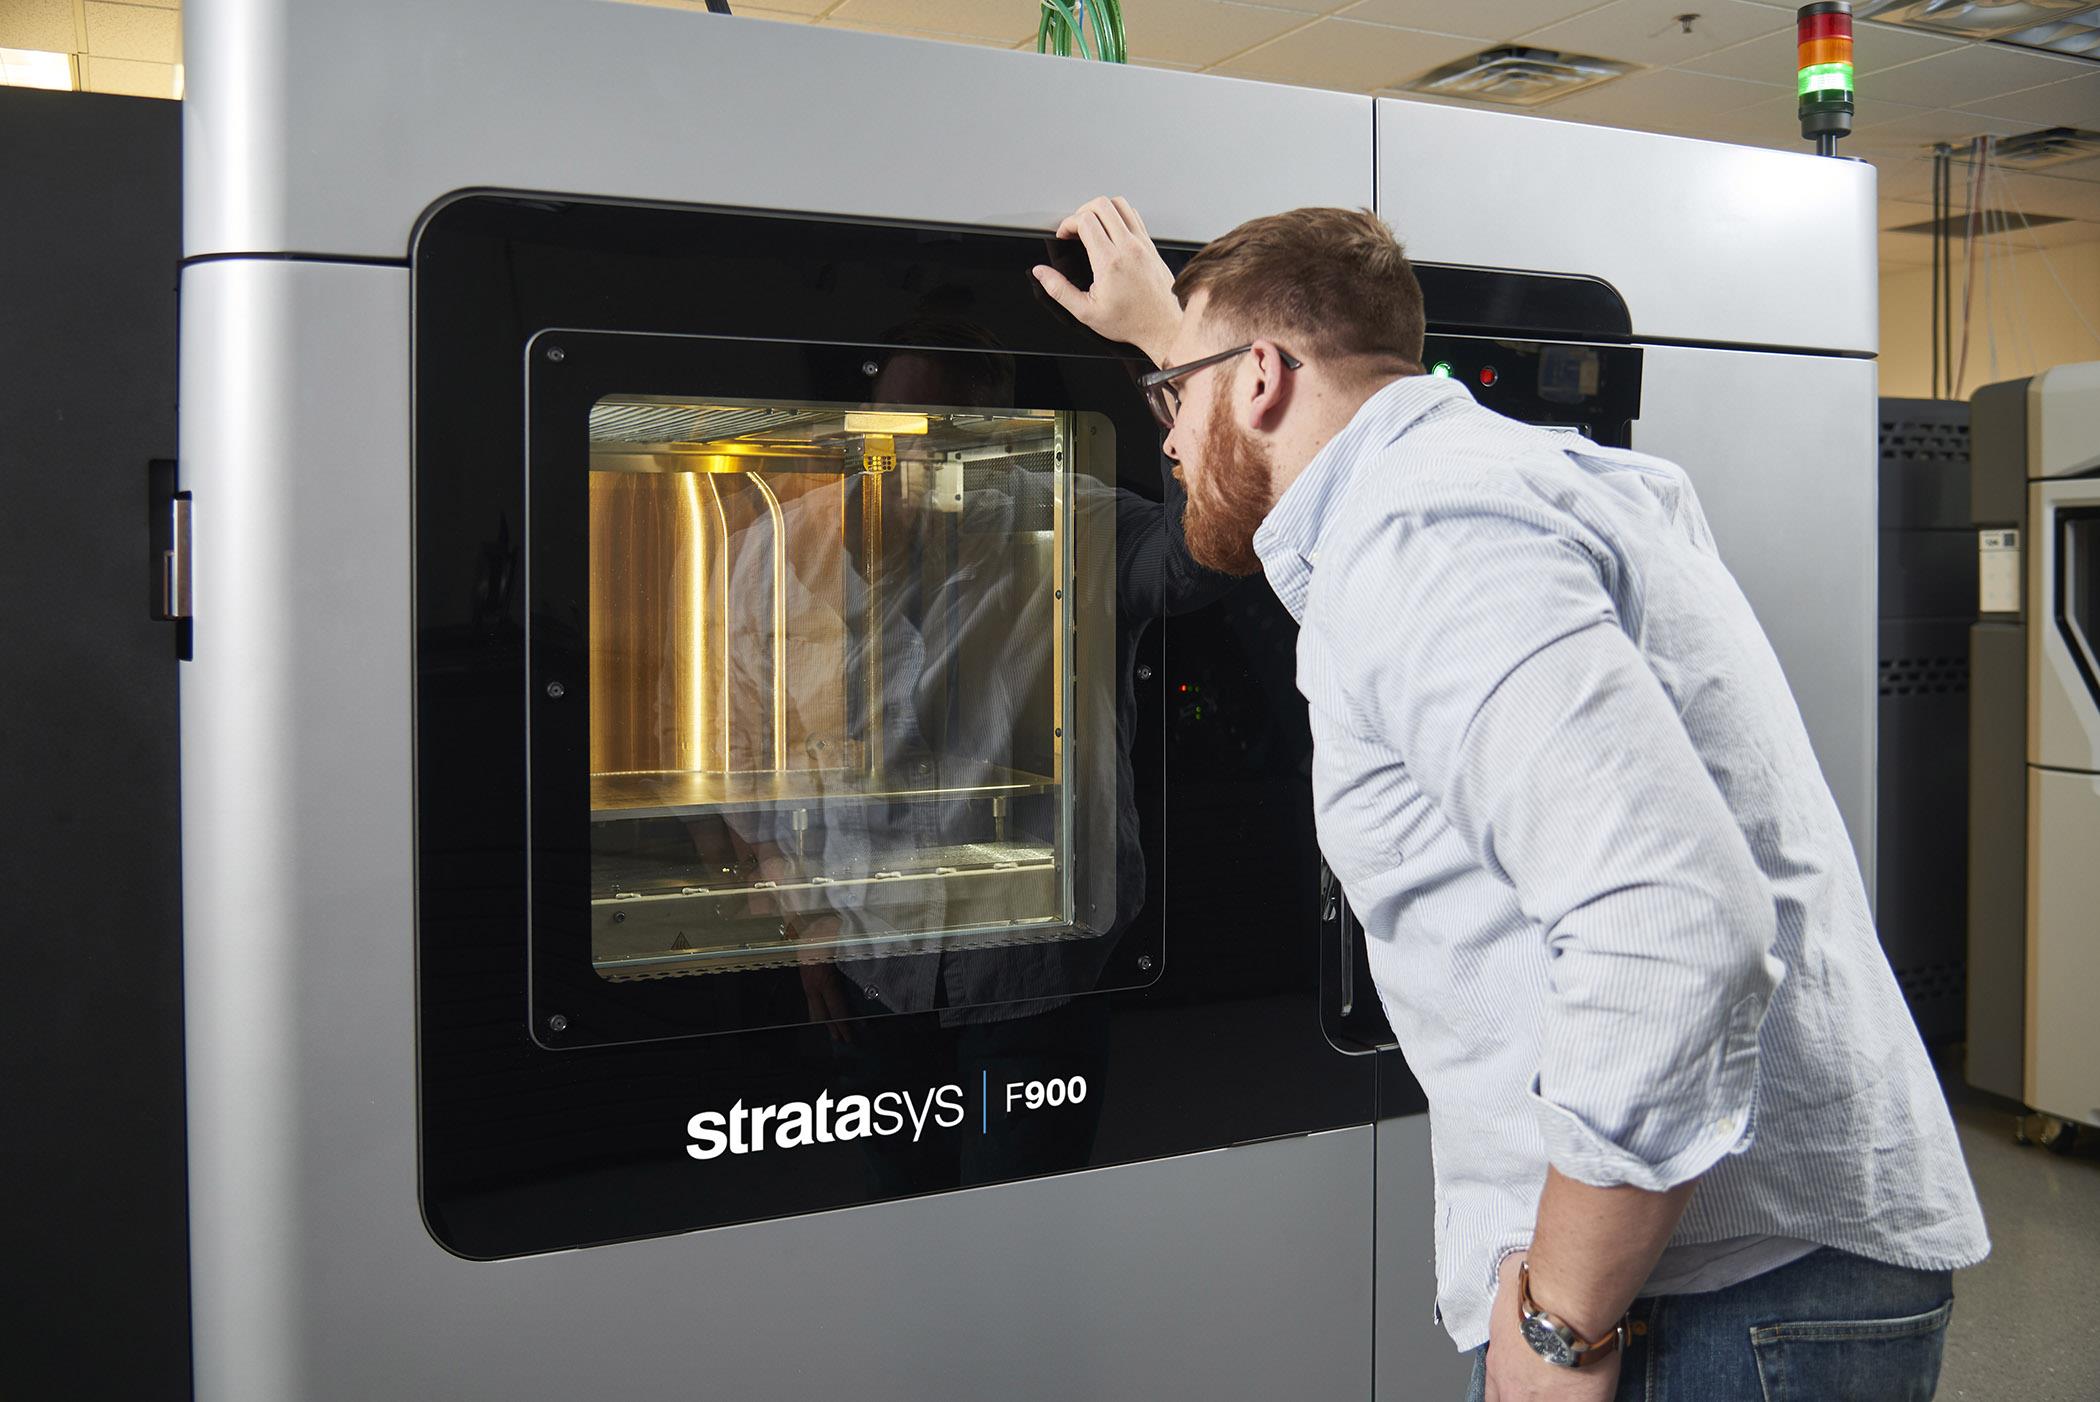 additive manufacturing has a major impact on technologies. Keep reading to learn more.